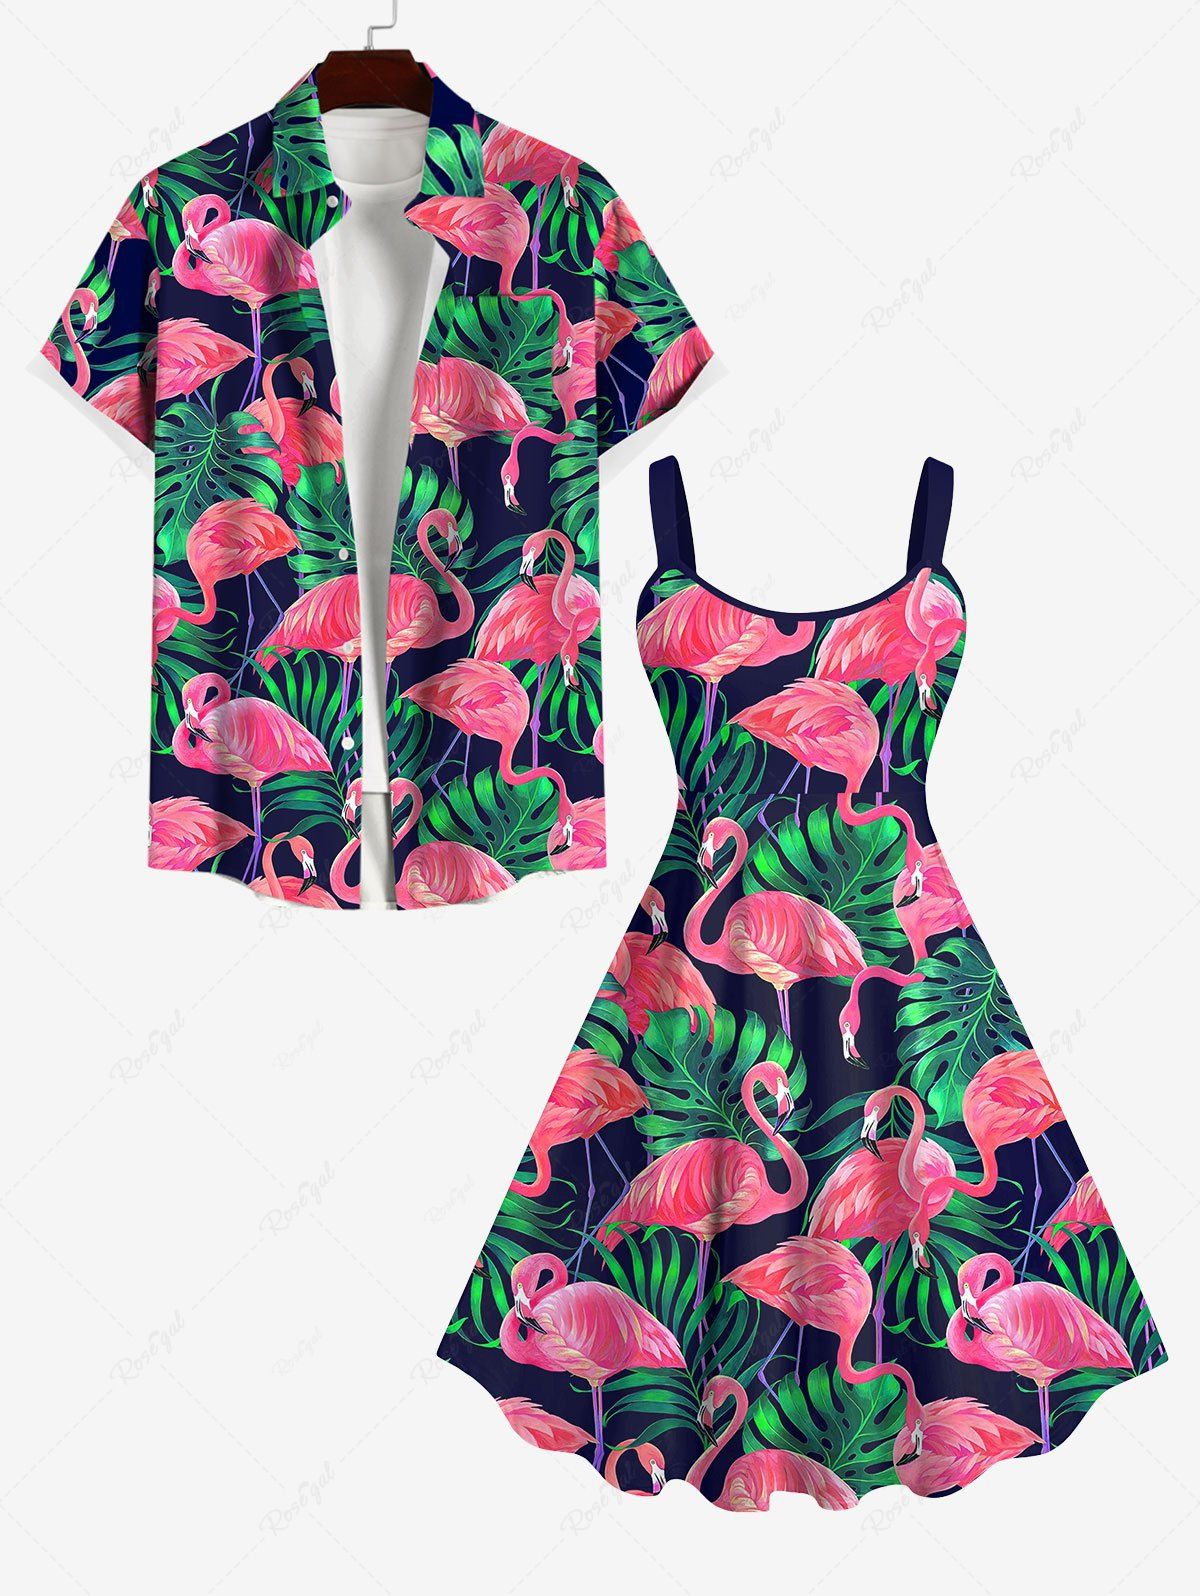 Fancy Flamingo Coconut Tree Leaf Print Backless Dress and Button Shirt Plus Size Matching Hawaii Beach Outfit for Couples  